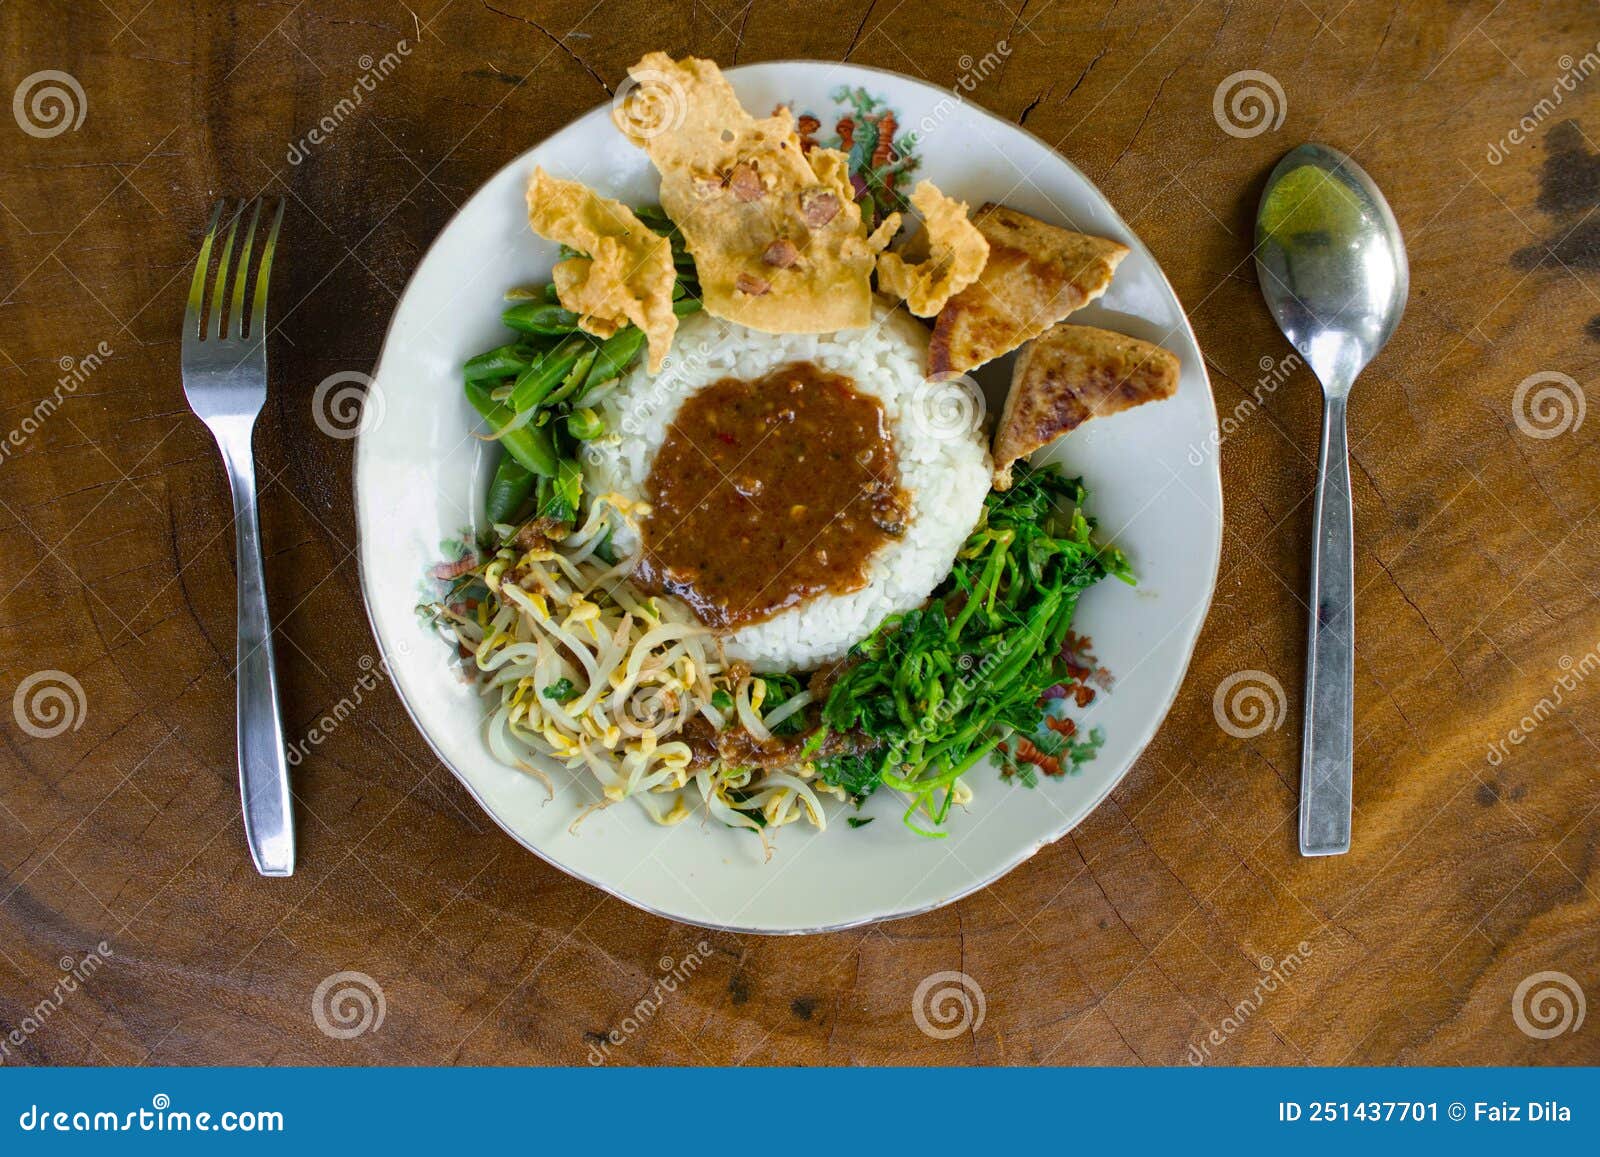 Nasi Pecel or Sego Pecel is Traditional Javanese Rice Dish of Steamed ...